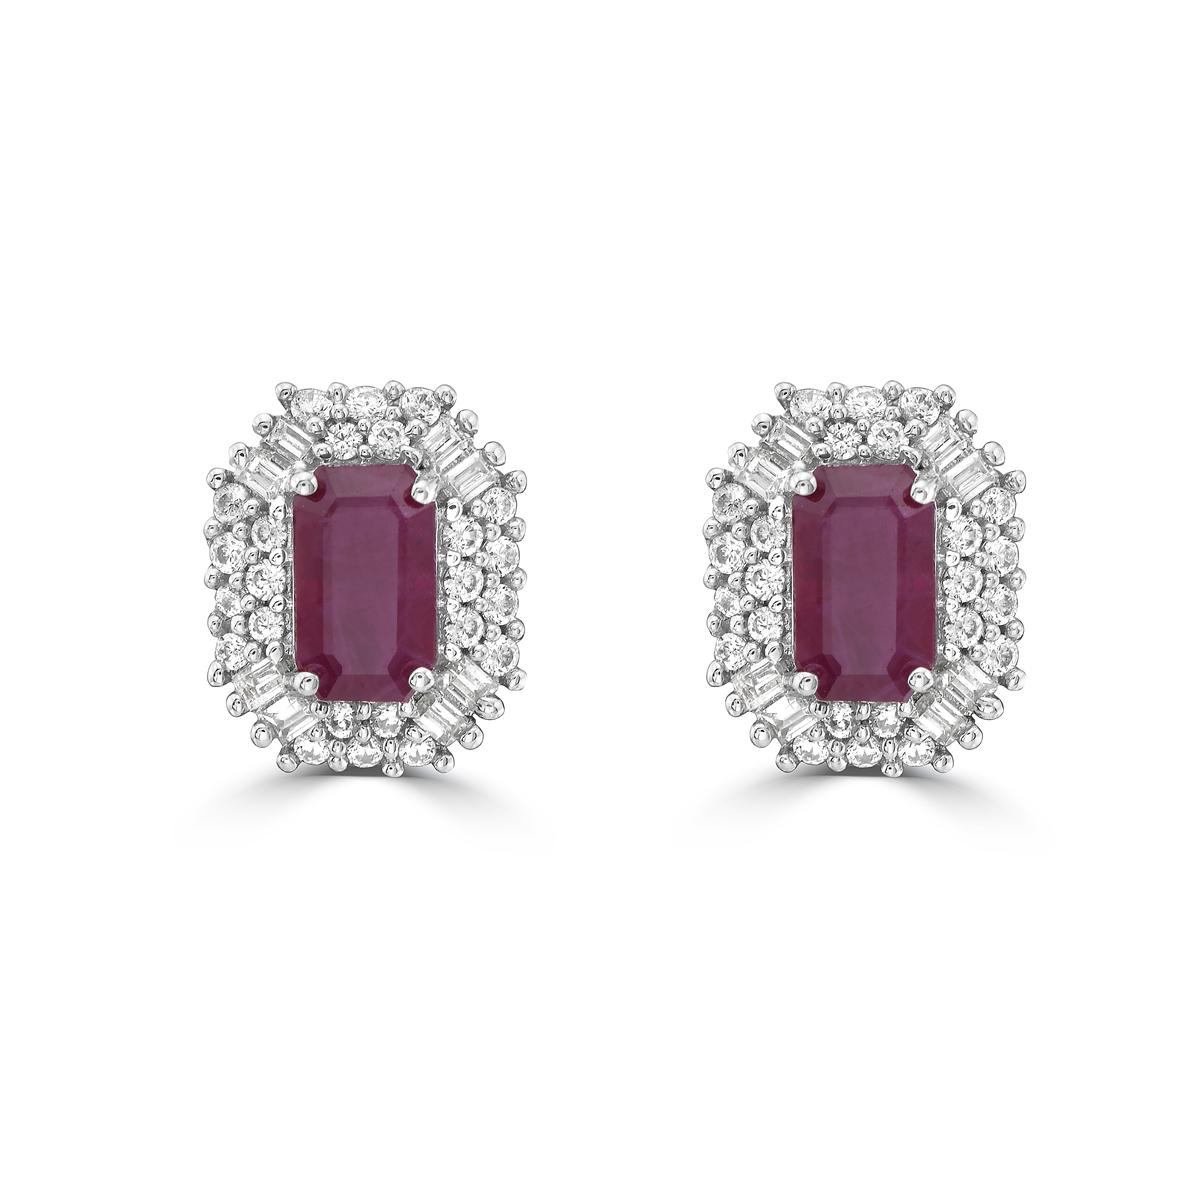 Indulge in luxury with our Ruby and Diamond Double Halo Stud Earrings. Featuring stunning baguette-cut rubies, these ruby stud earrings exude sophistication and exclusivity. The dazzling double halo design with accompanying diamonds adds an elegant